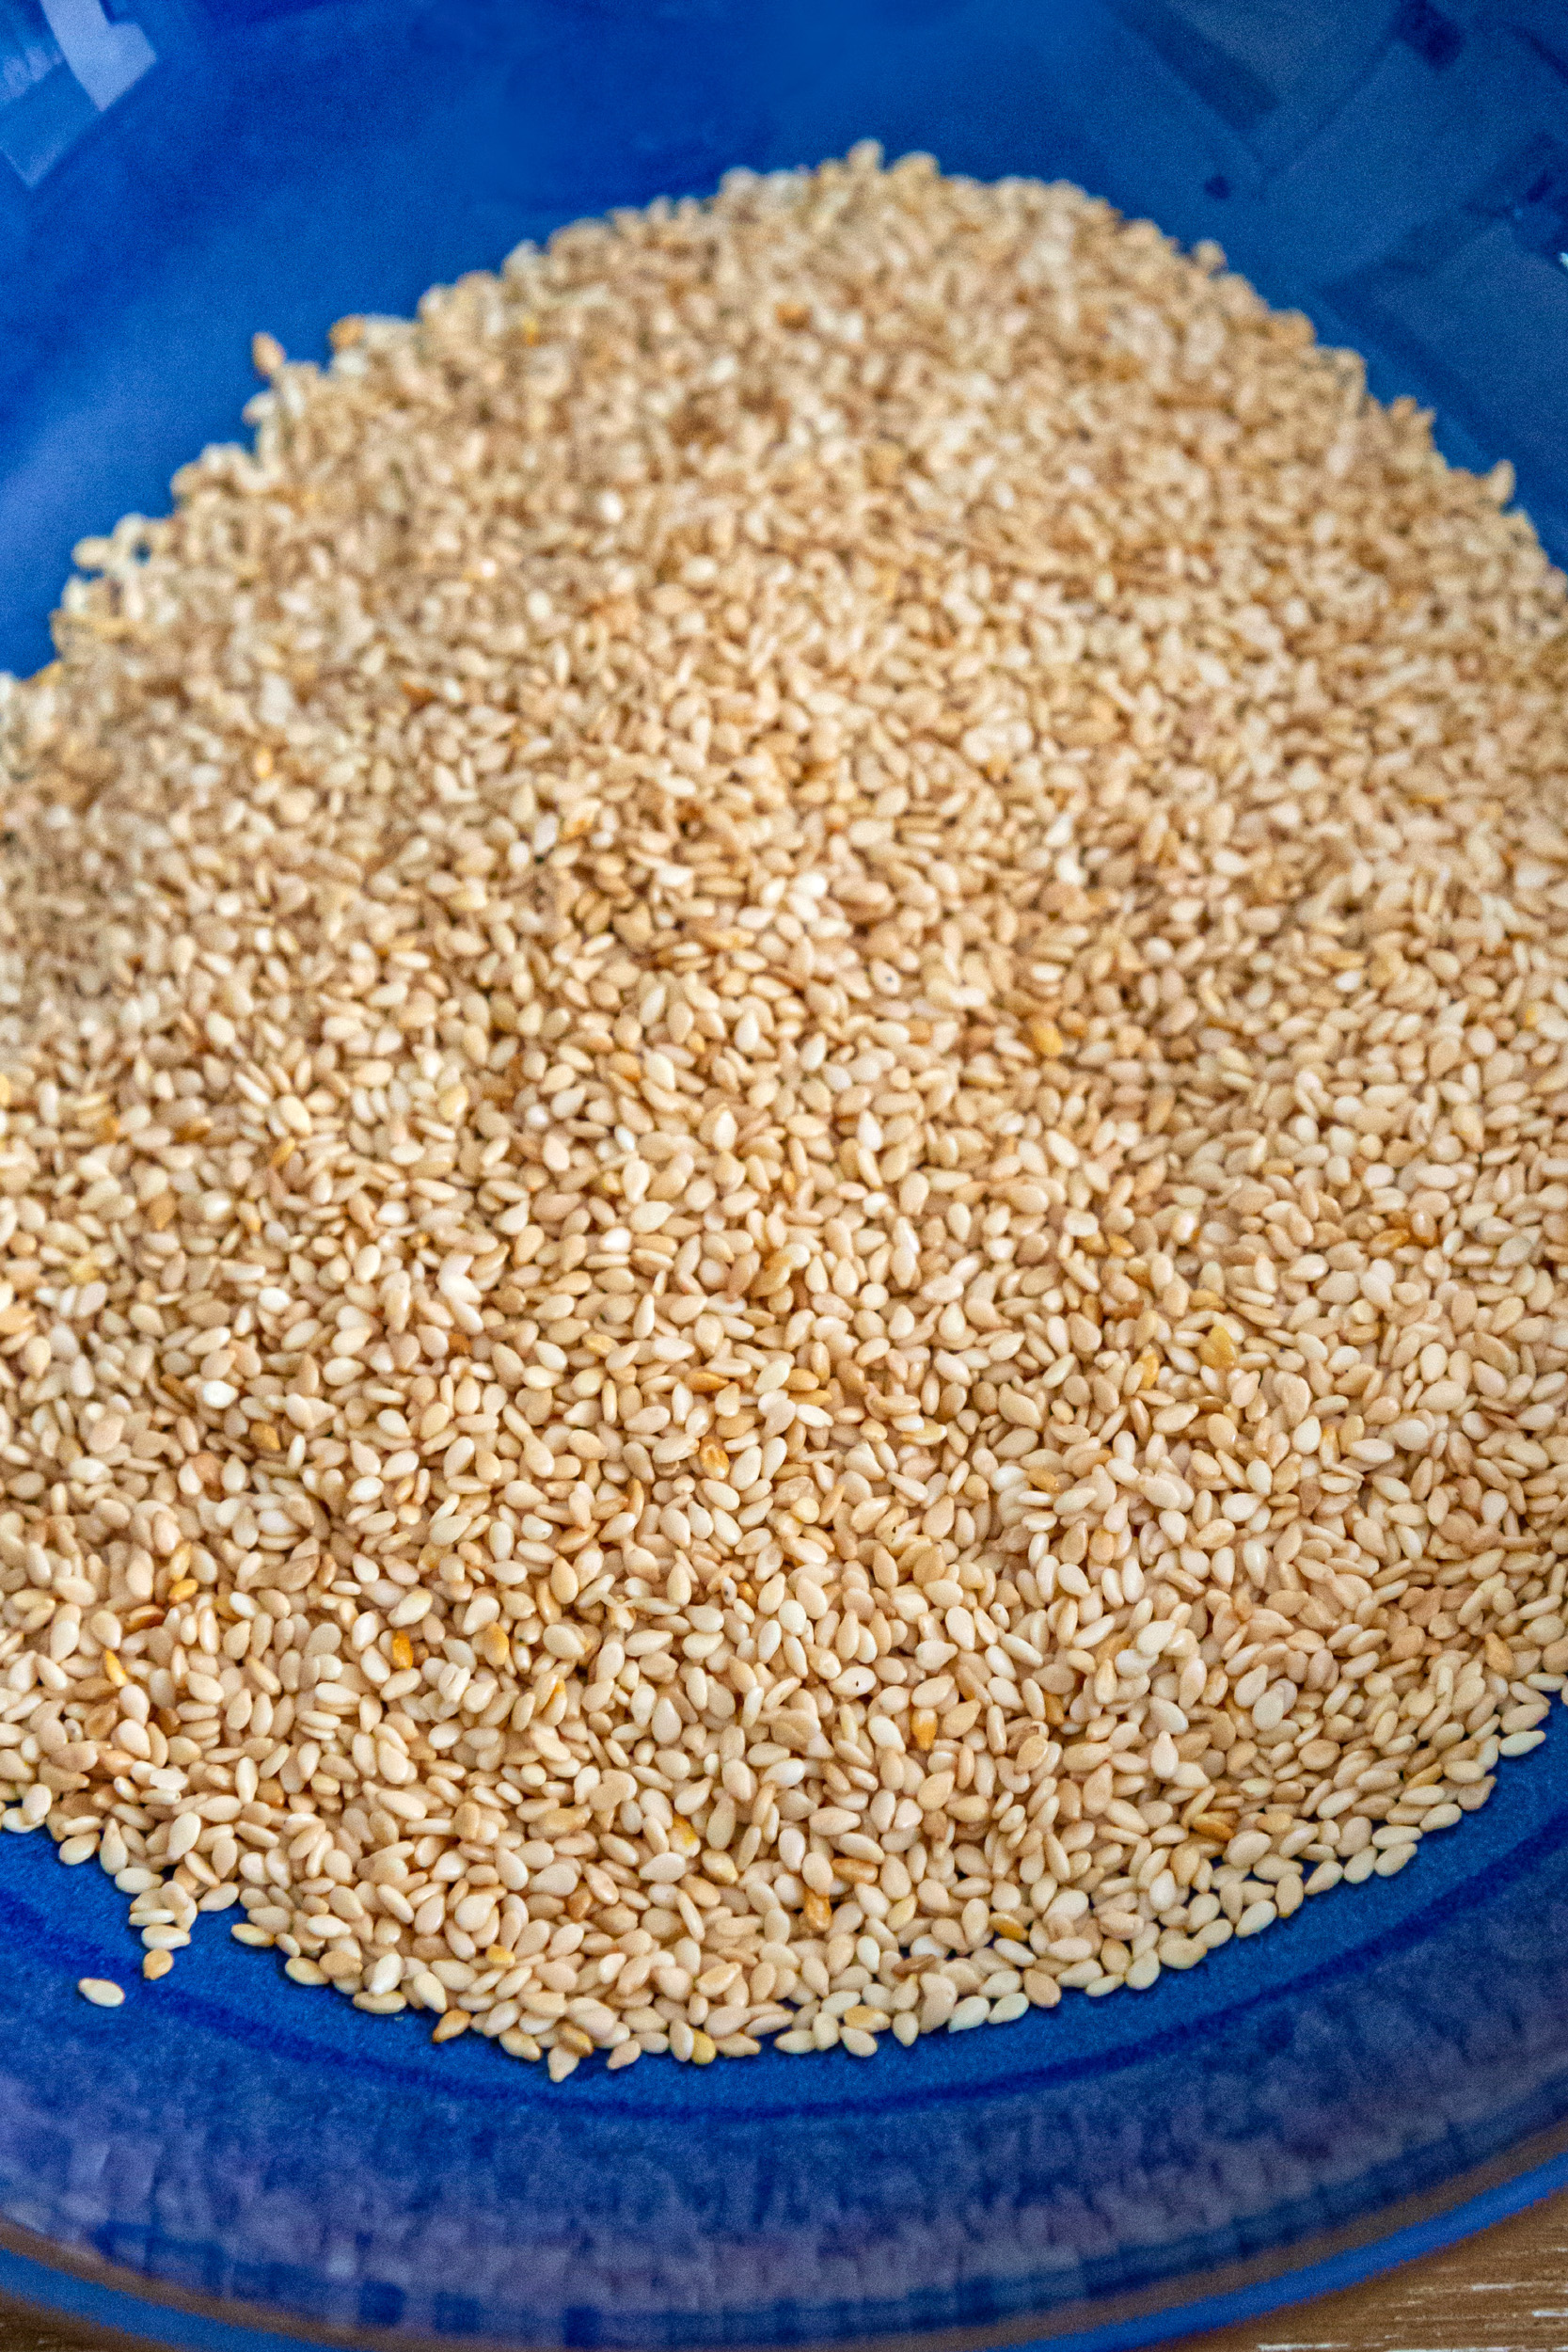 A close up of a blue bowl filled with toasted sesame seeds